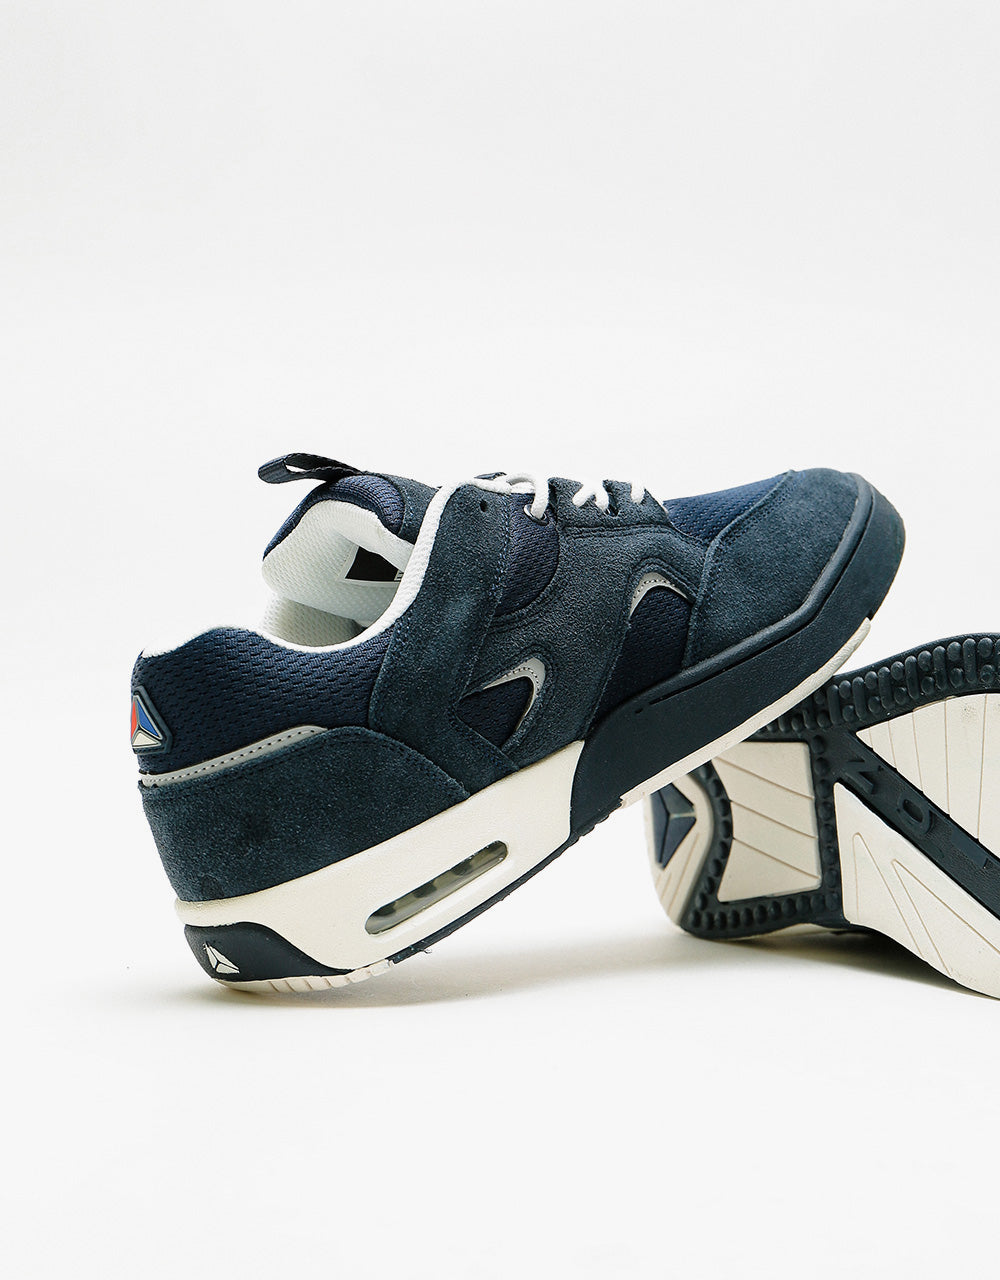 Axion Genesis Skate Shoes - Navy/Silver/White